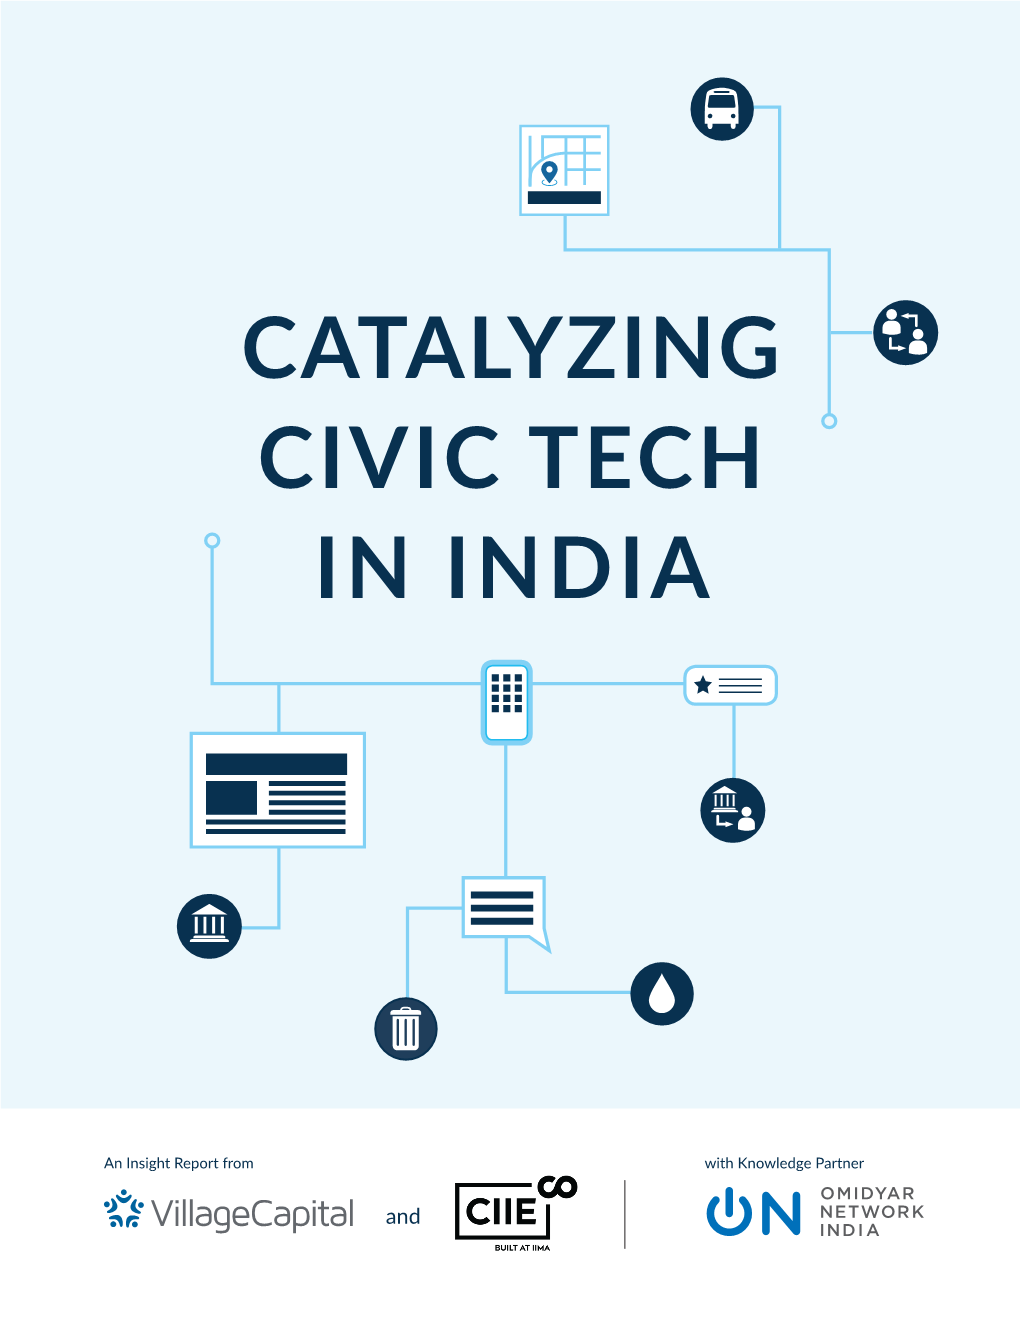 Catalyzing Civic Tech in India